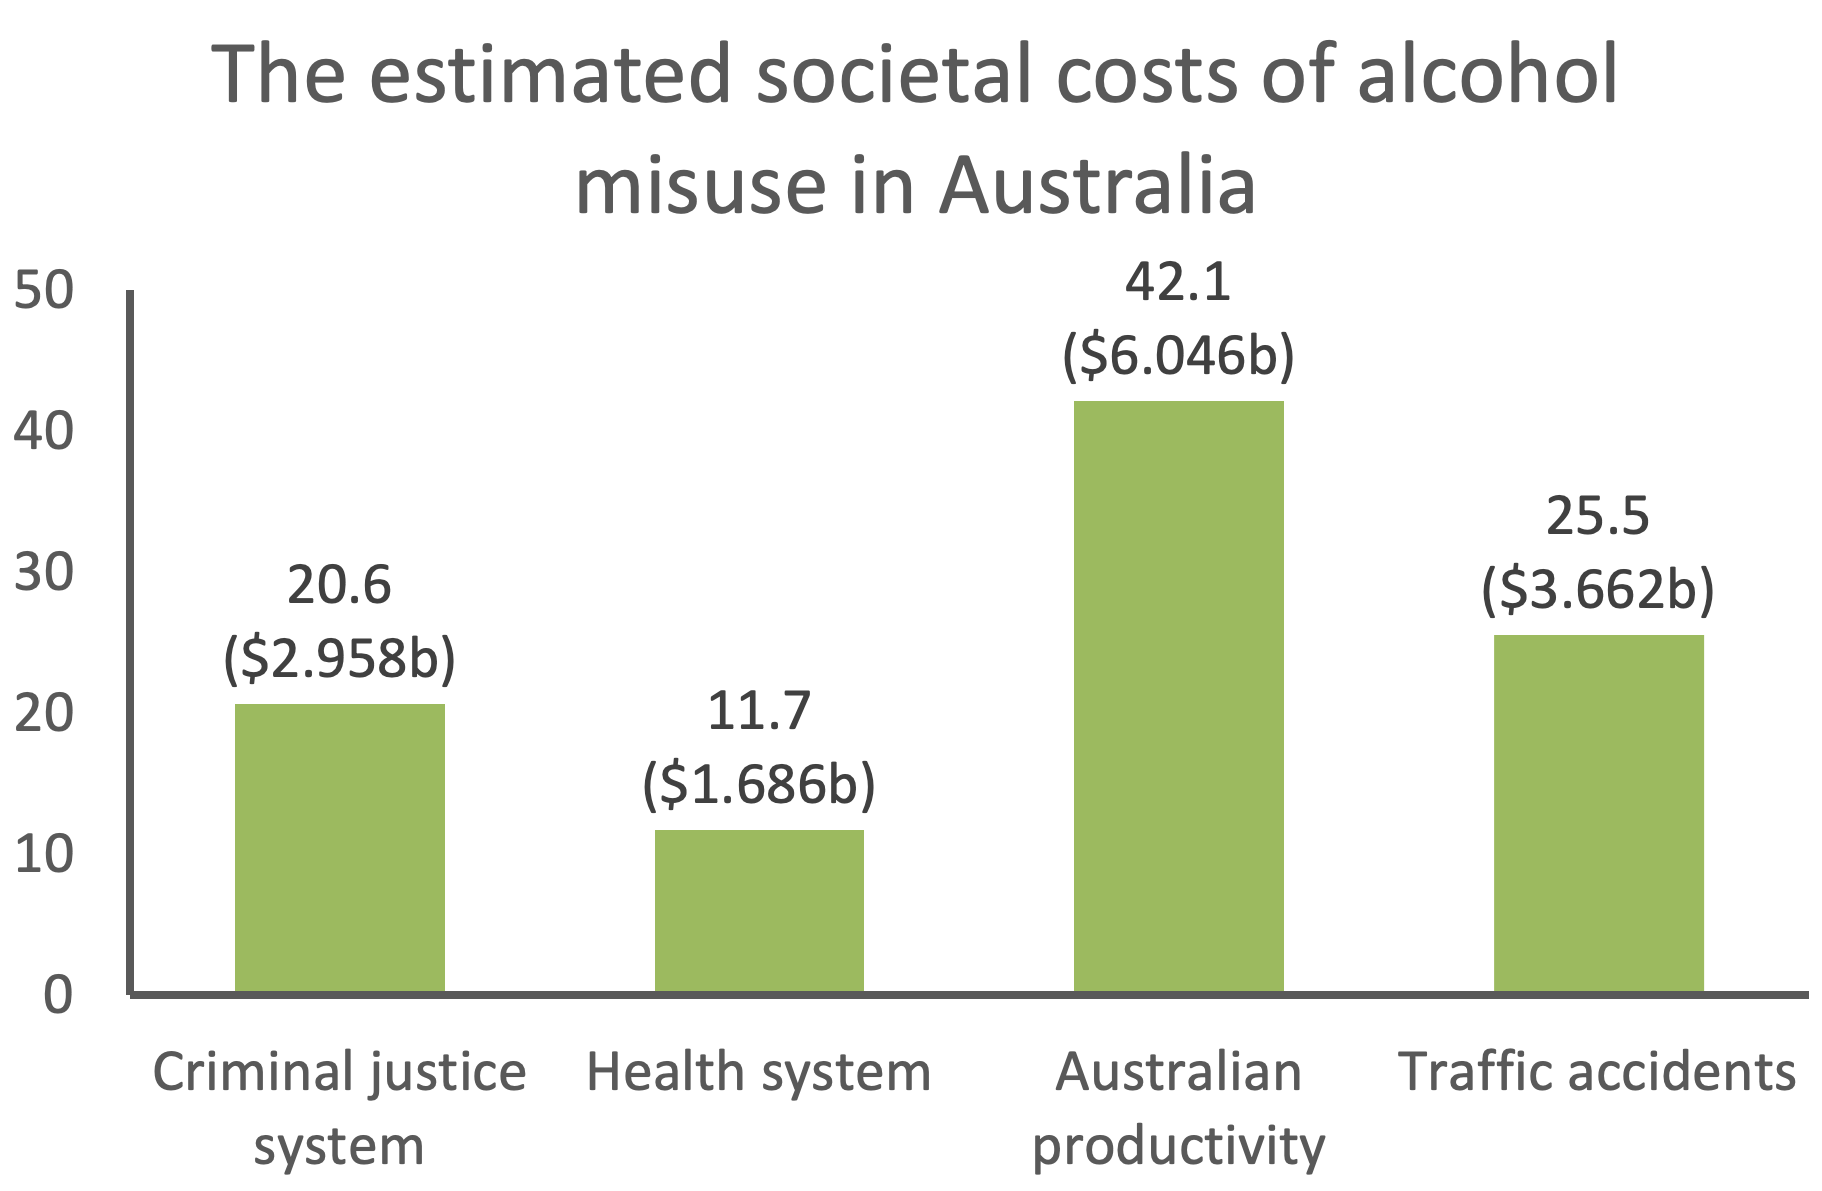 a column graph showing the estimated societal costs of alcohol misuse in Australia. Percentage of total cost is given along the y-axis. The four areas of society listed are criminal justice system (20.6% of total costs or 2.958 billion dollars), health system (11.7% of total costs or 1.686 billion dollars), Australian productivity (42.1% of total costs or 6.046 billion dollars) and traffic accidents (25.5% of total costs or 3.662 billion dollars)